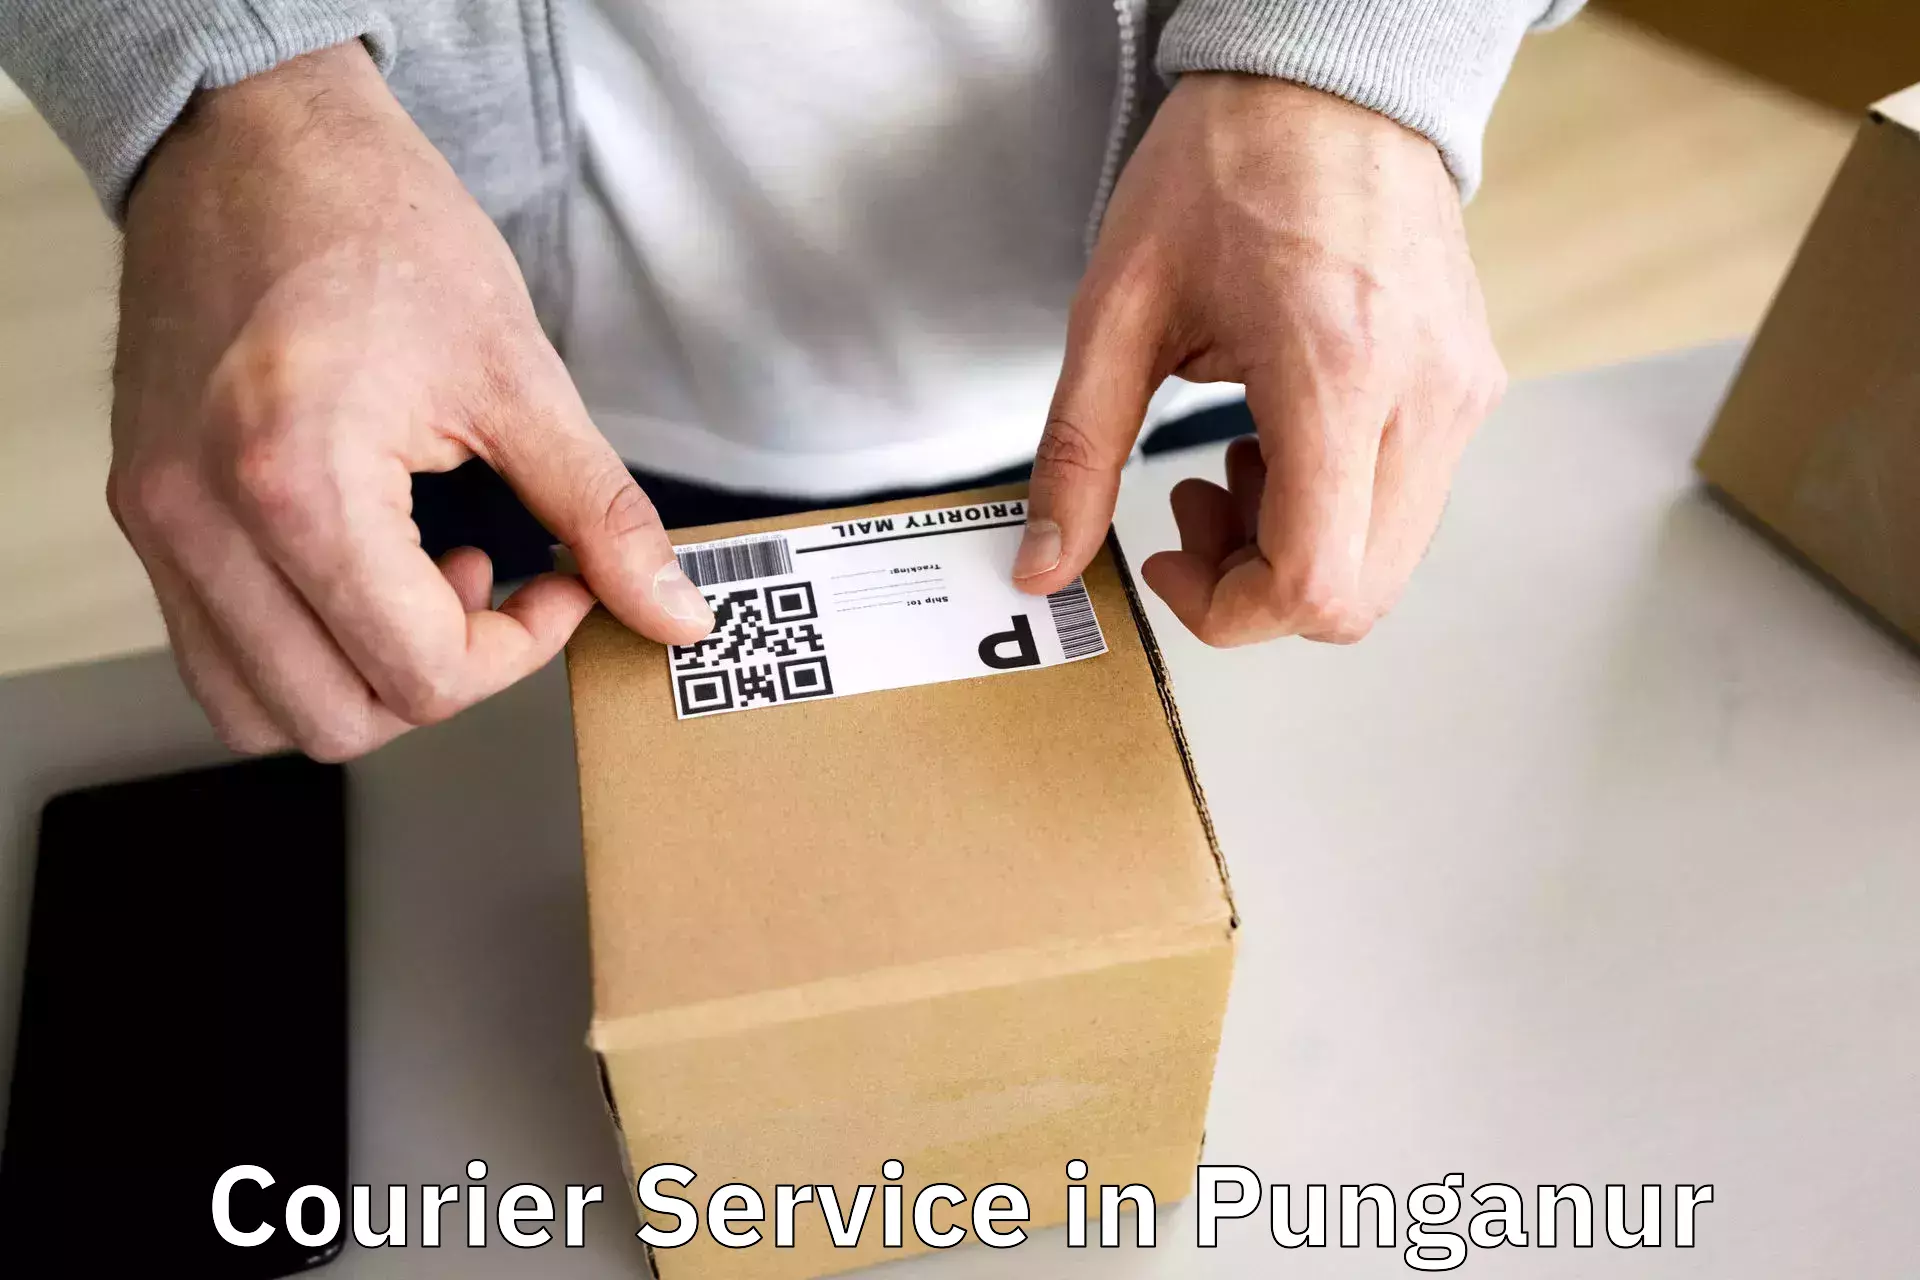 Secure shipping methods in Punganur